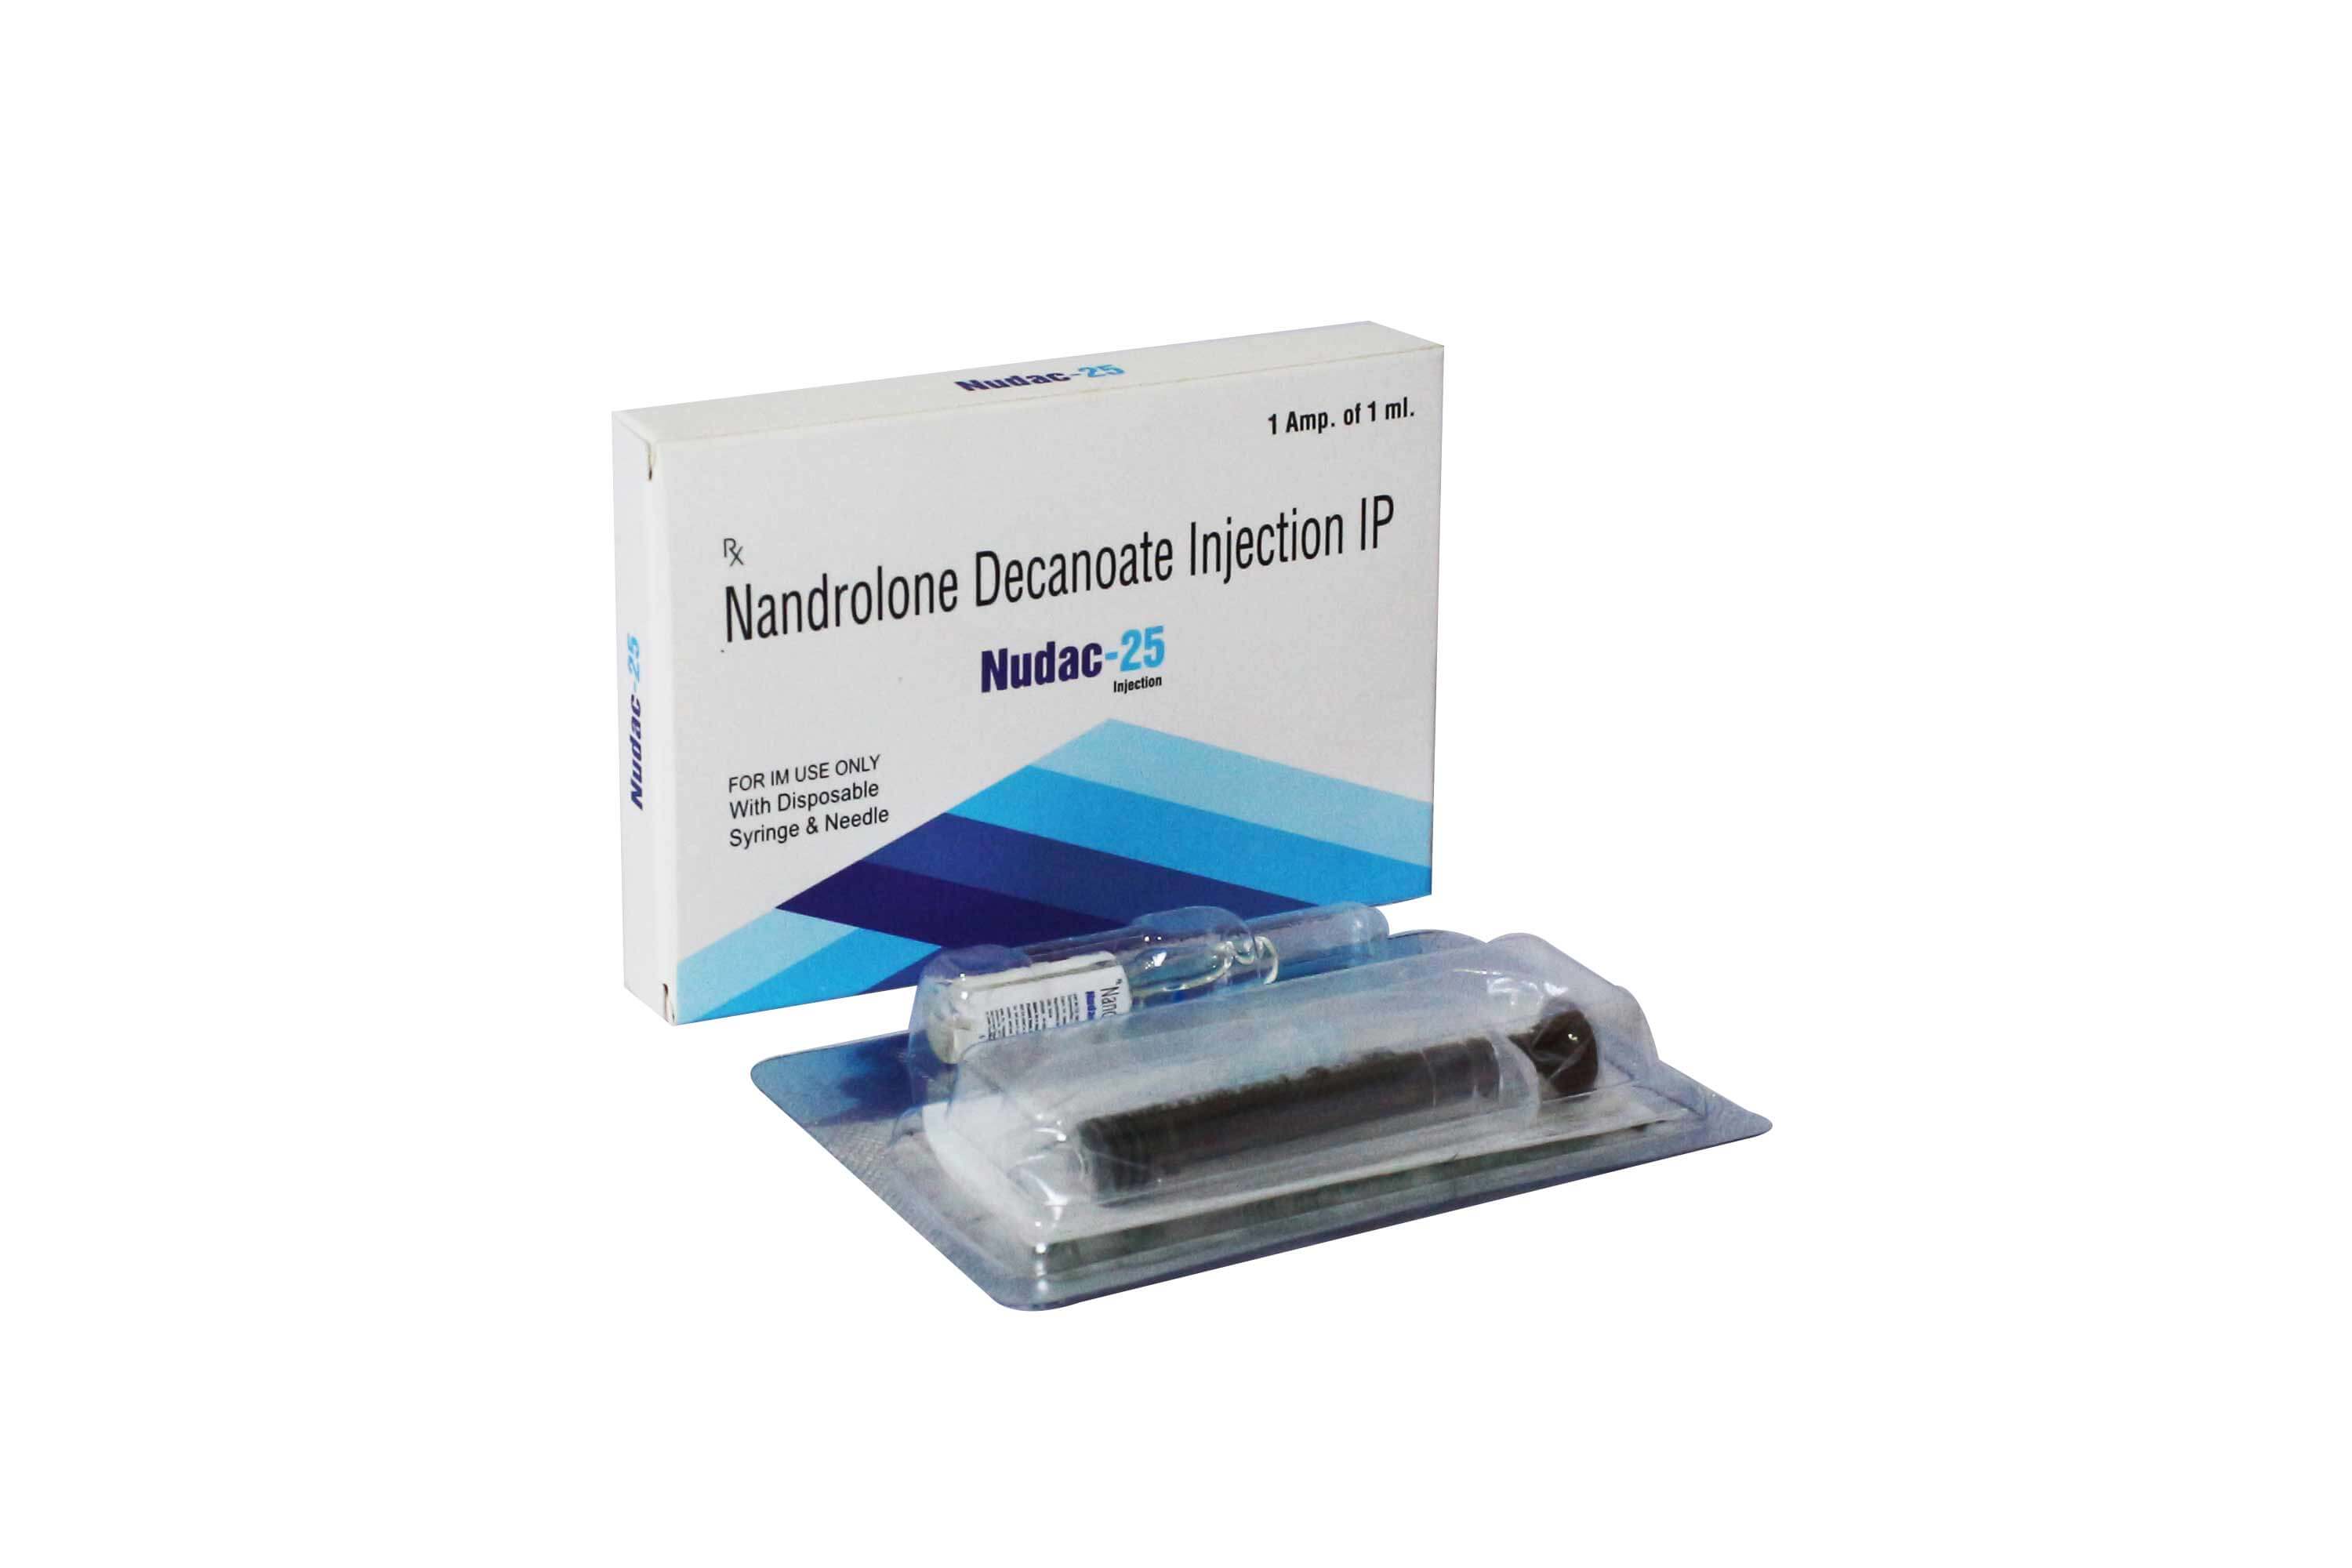 Product Name: Nudac 25, Compositions of Nudac 25 are Nandrolone Decanoate Injection IP - Numantis Healthcare